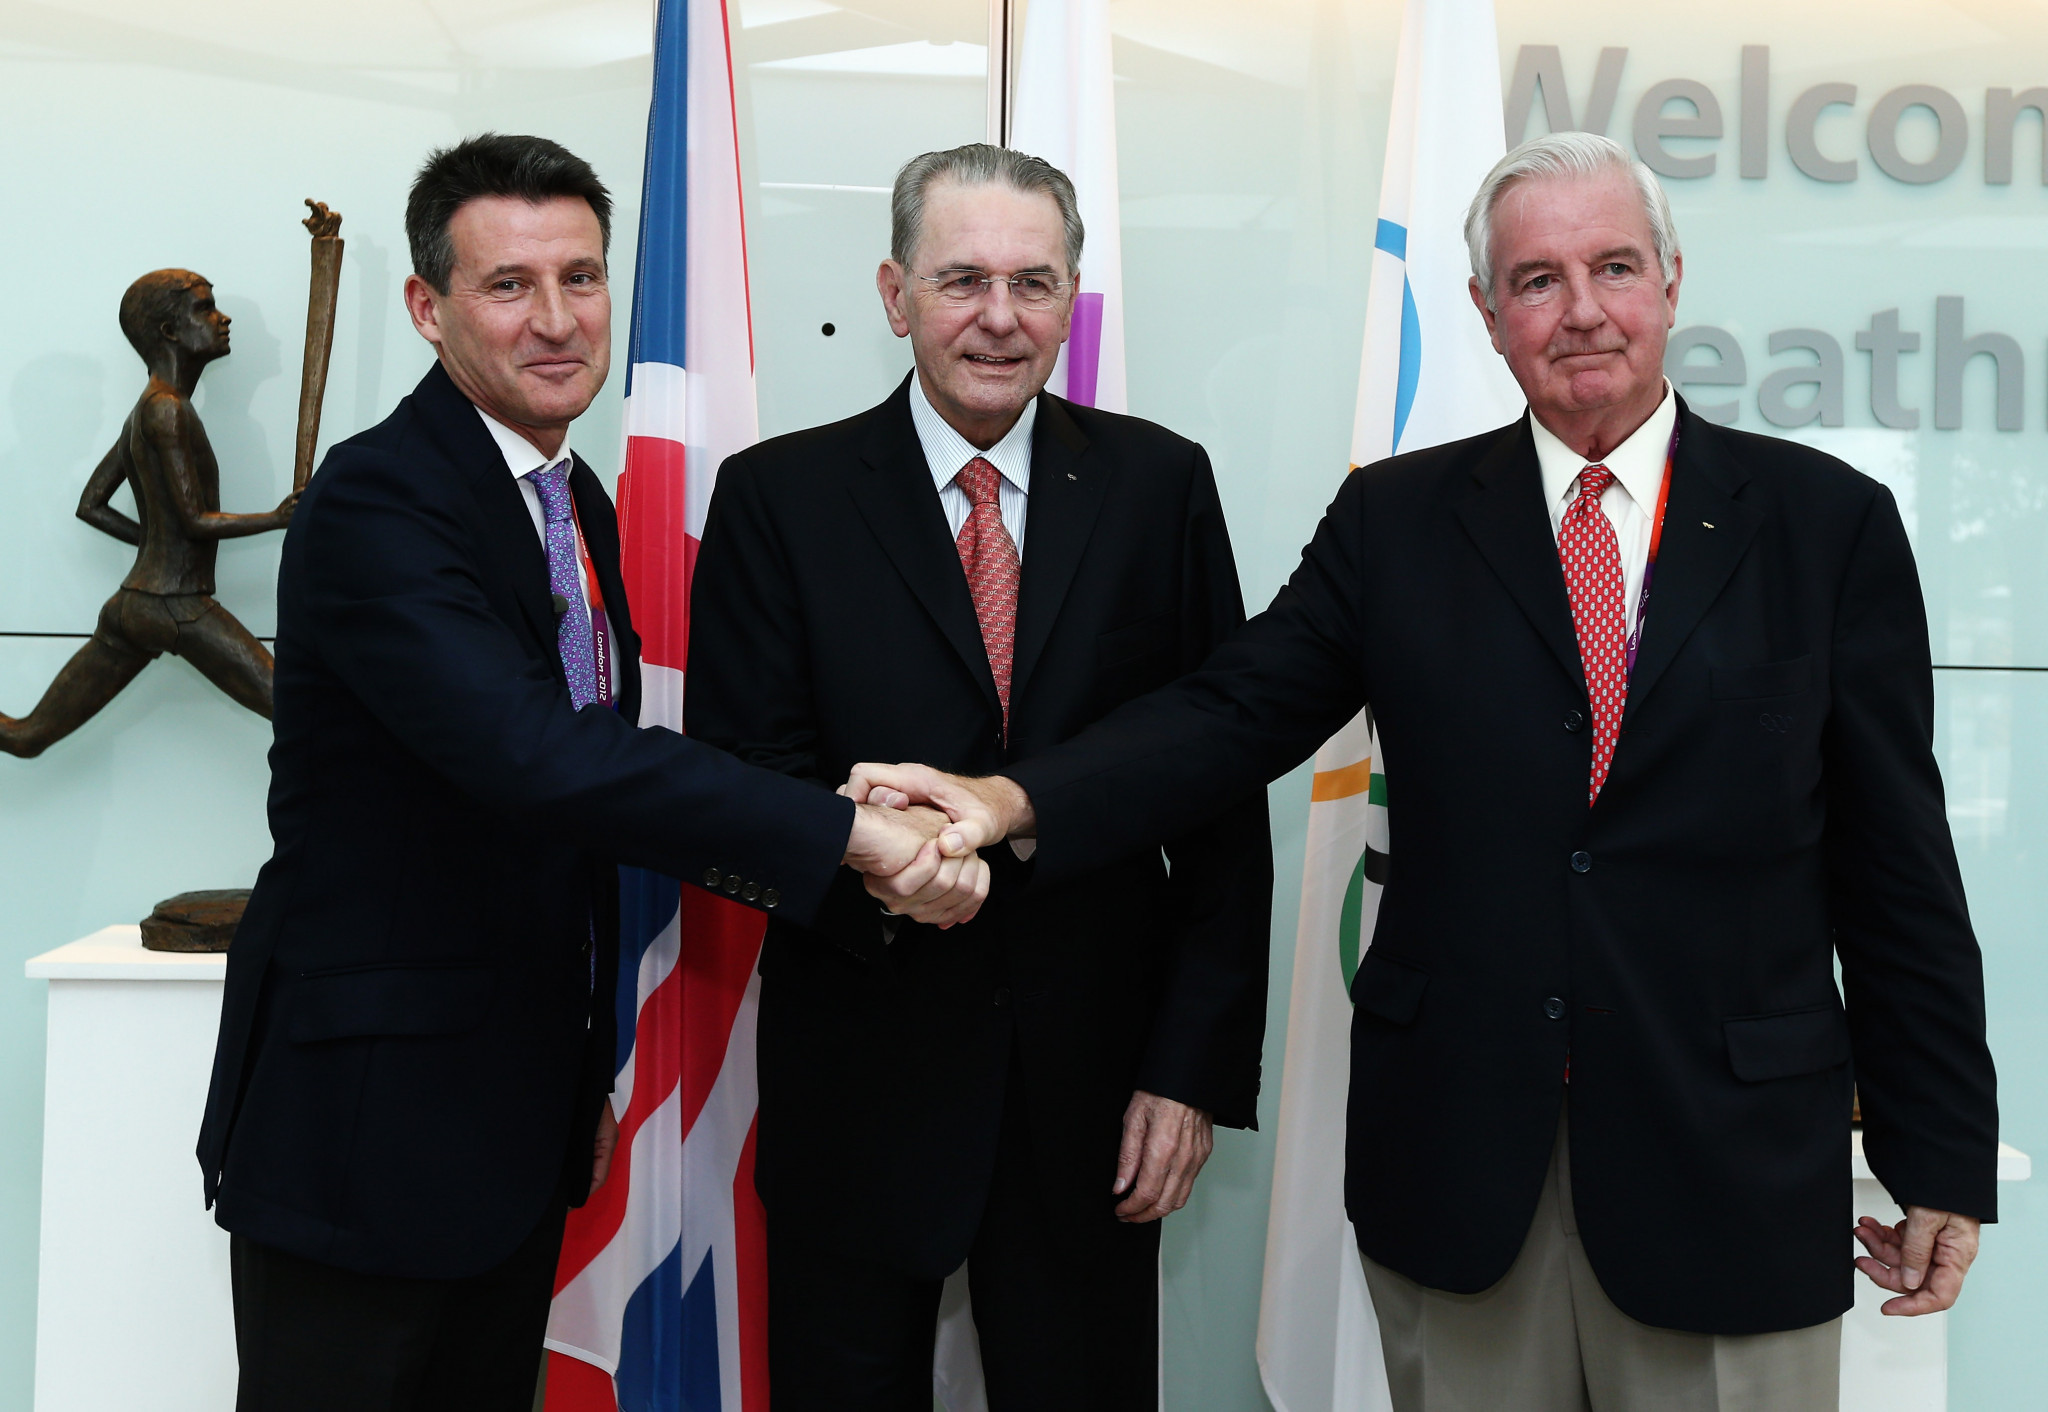 Sir Craig Reedie, right, with then-International Olympic Committee President Jacques Rogge, centre, and London 2012 chief Sebastian Coe before the British capital hosted the Olympic Games in 2012 ©Getty Images